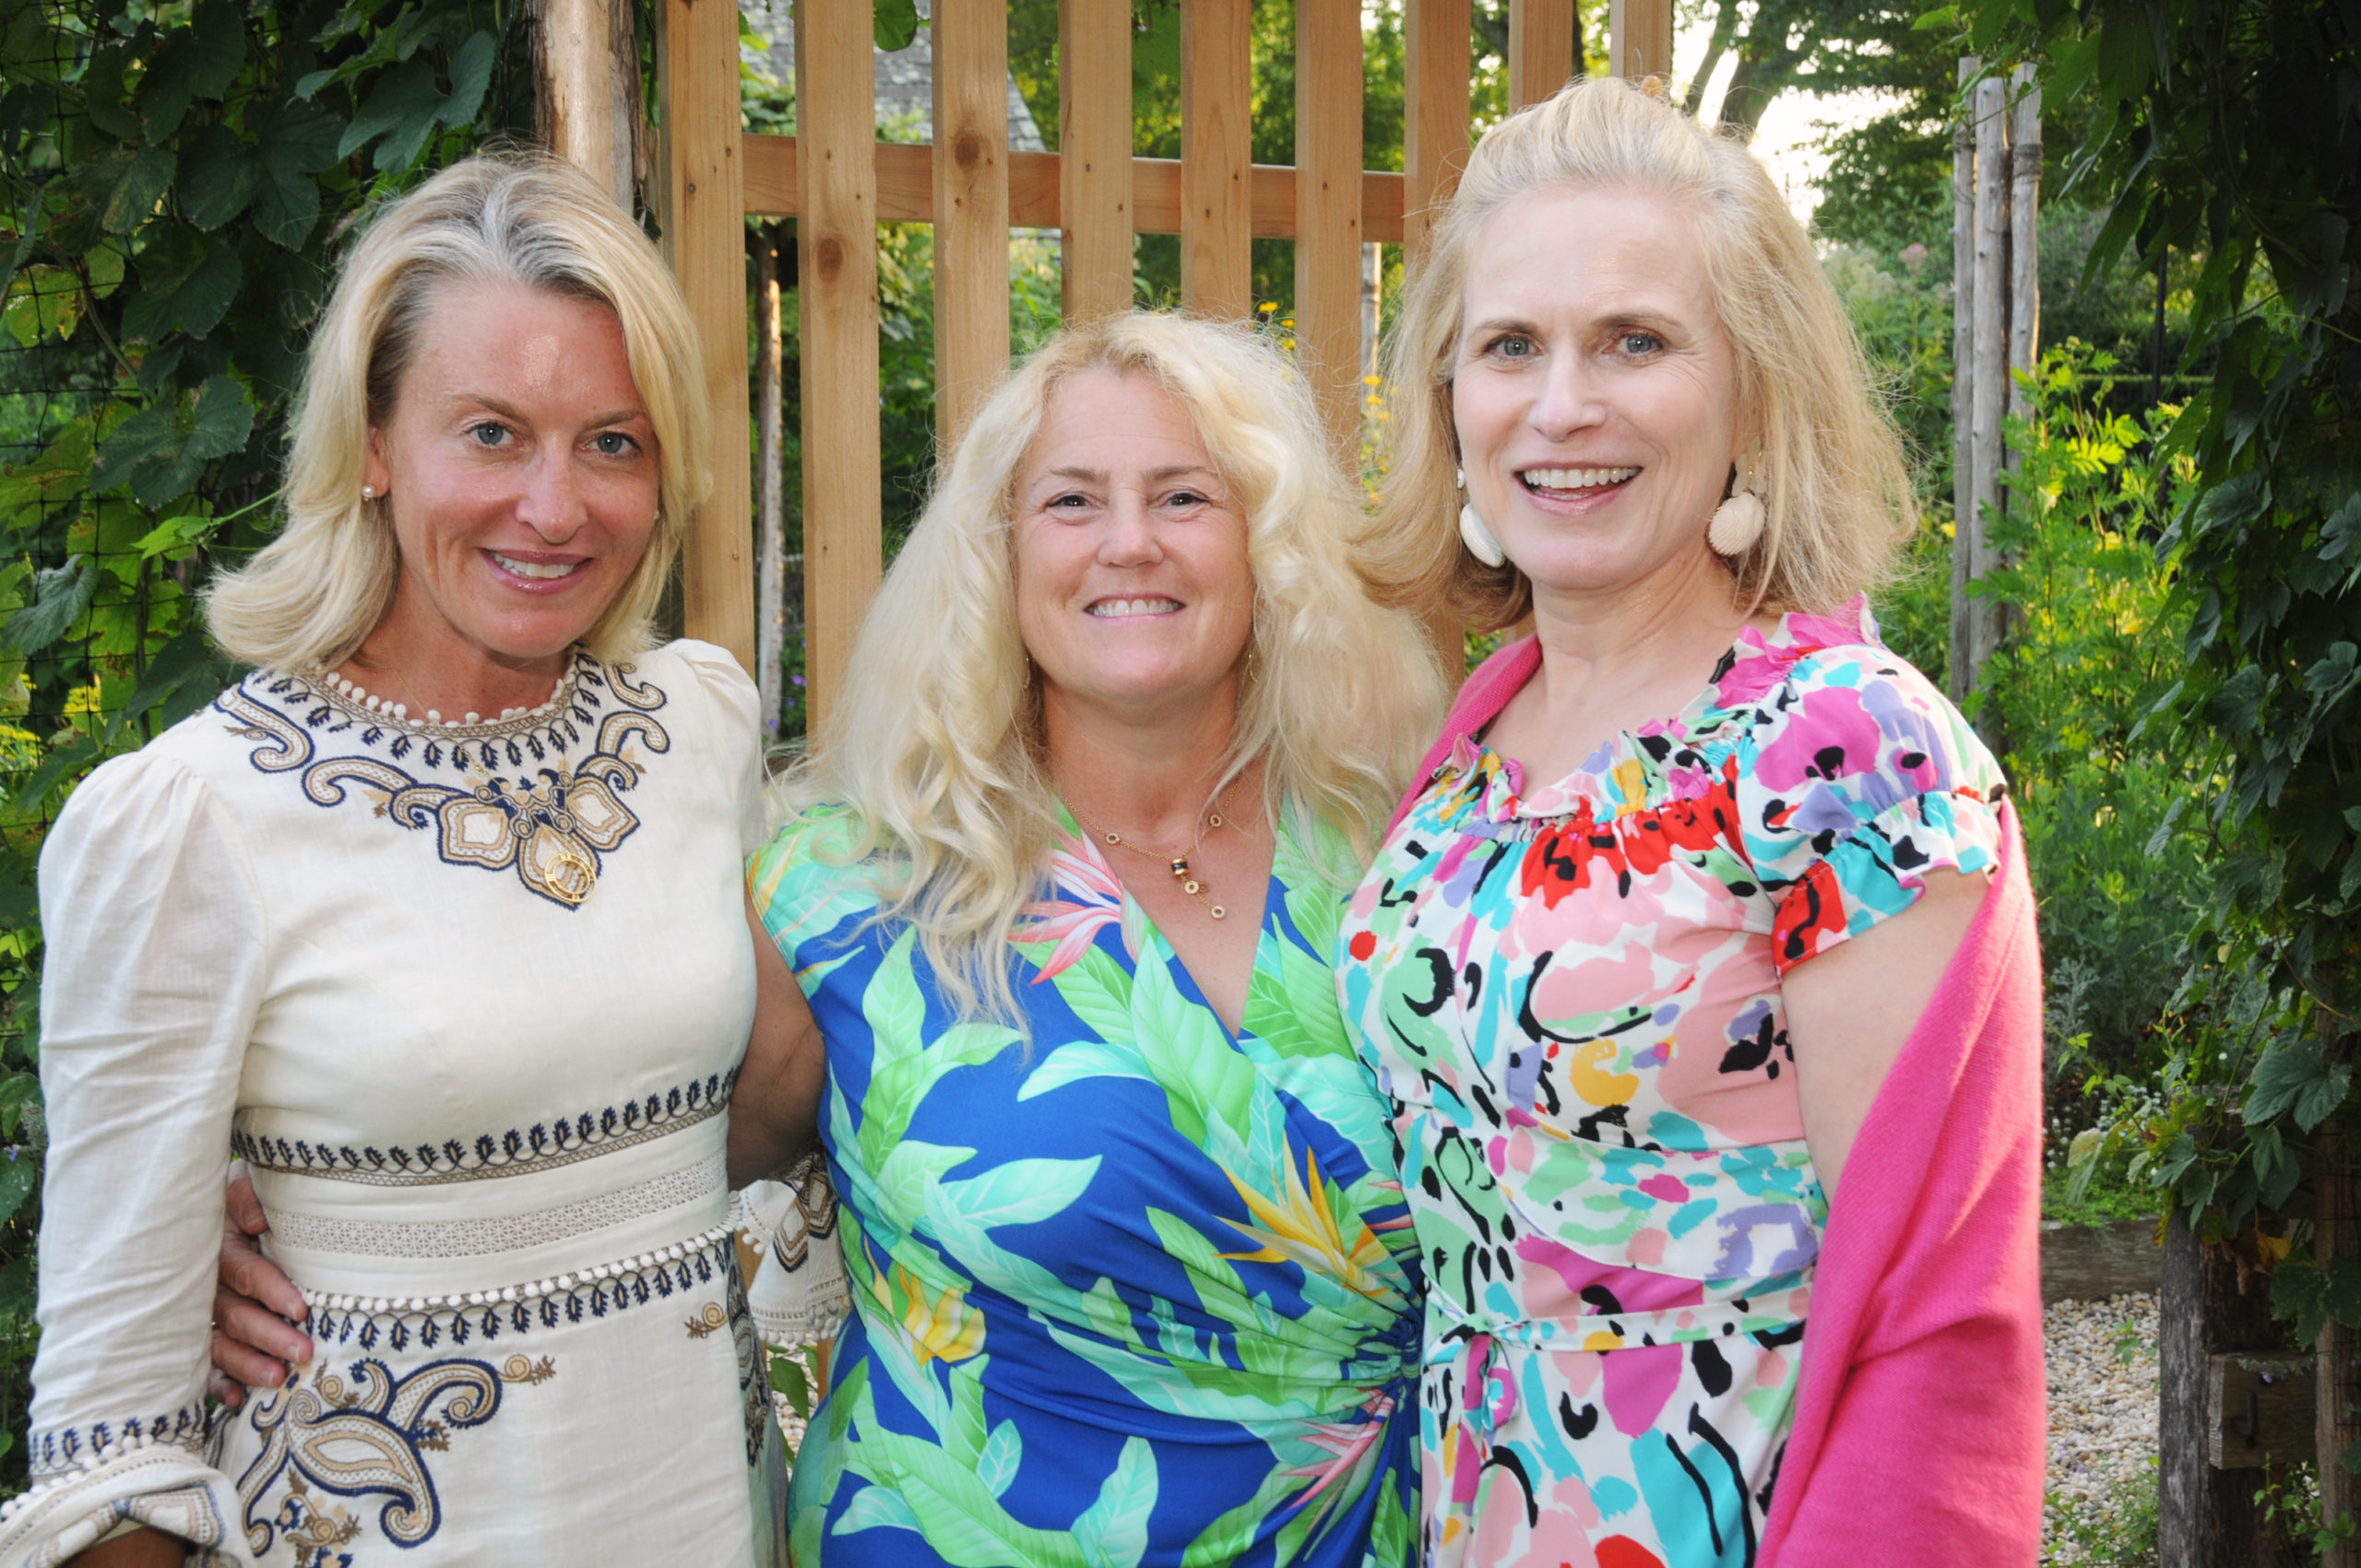 Tina Teel, Lynda Packard and Jennifer Borg at the East Hampton Historical Society's preview benefit cocktail party for the 2021 East Hampton Antiques & Design Show on Friday evening on the grounds of Mulford Farm. RICHARD LEWIN